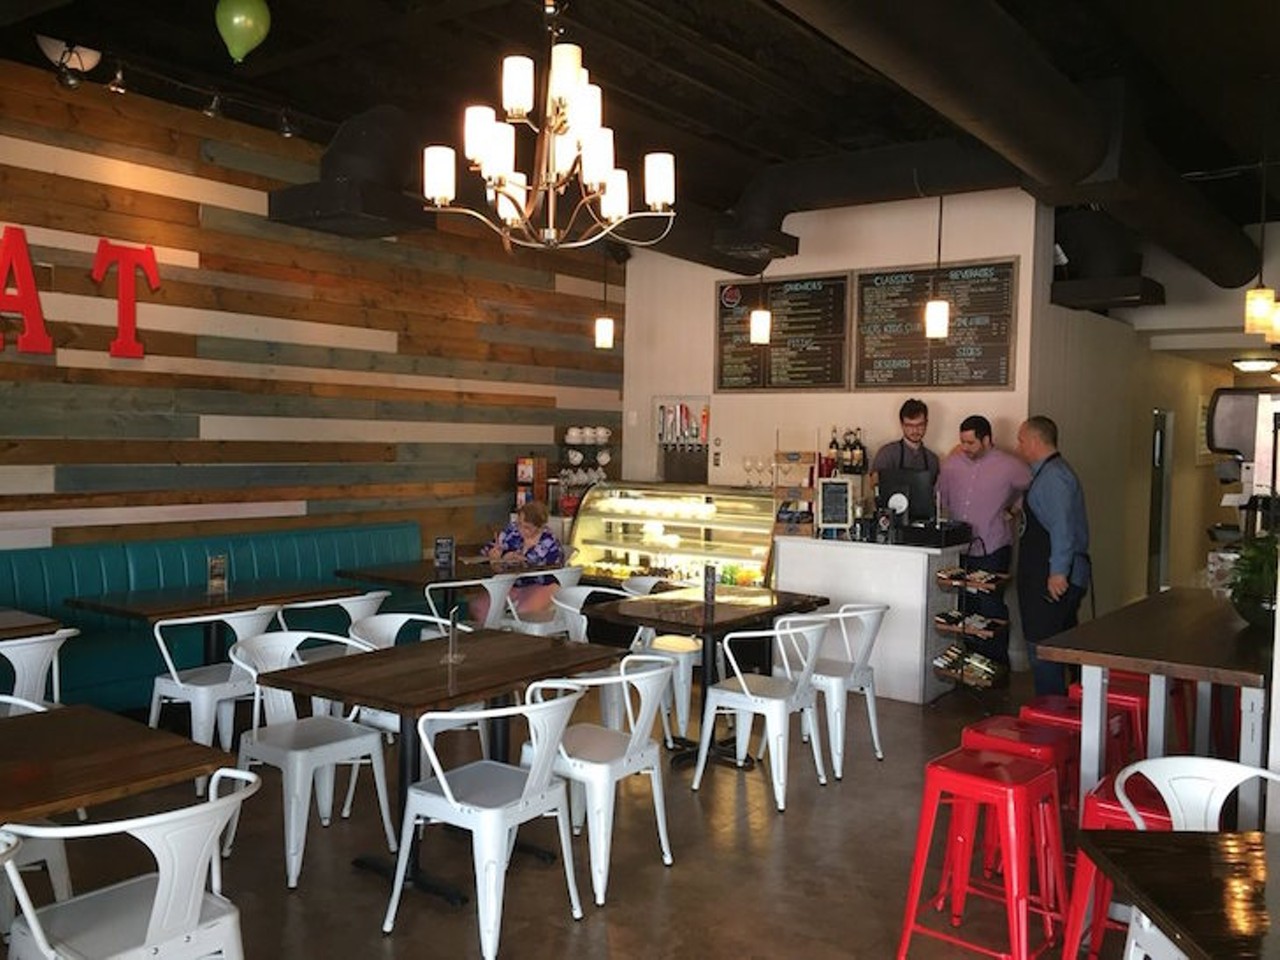 1803 Pizza Kitchen
1803 E. Winter Park Road, Orlando, 32803 (407) 647-3872
Ever heard of weekend pizza brunch? 1803 serves it. Their custom artisan pizzas are made by a chef with 20 years of experience.Photo via Ruth S./Yelp